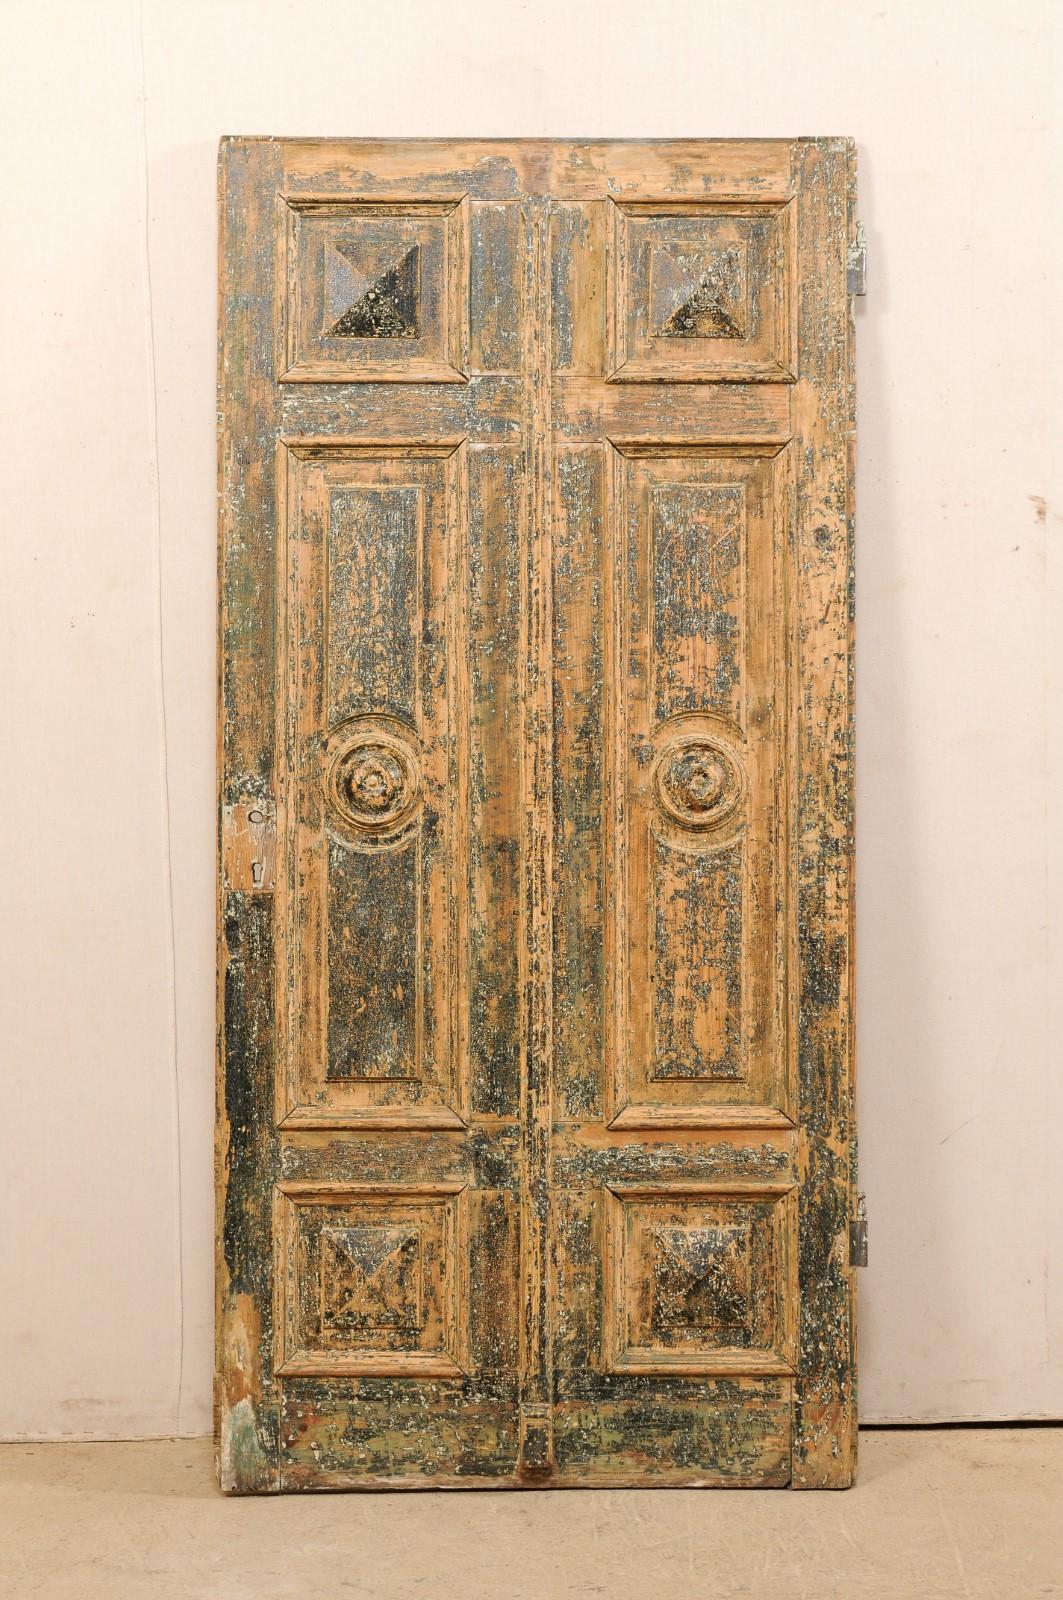 A Spanish single door with decoratively-carved raised panels from the early 19th century. This lovely antique door from Spain features a six raised panel front, comprised of two rows of rectangular panels with squared panels at top and bottom, and a